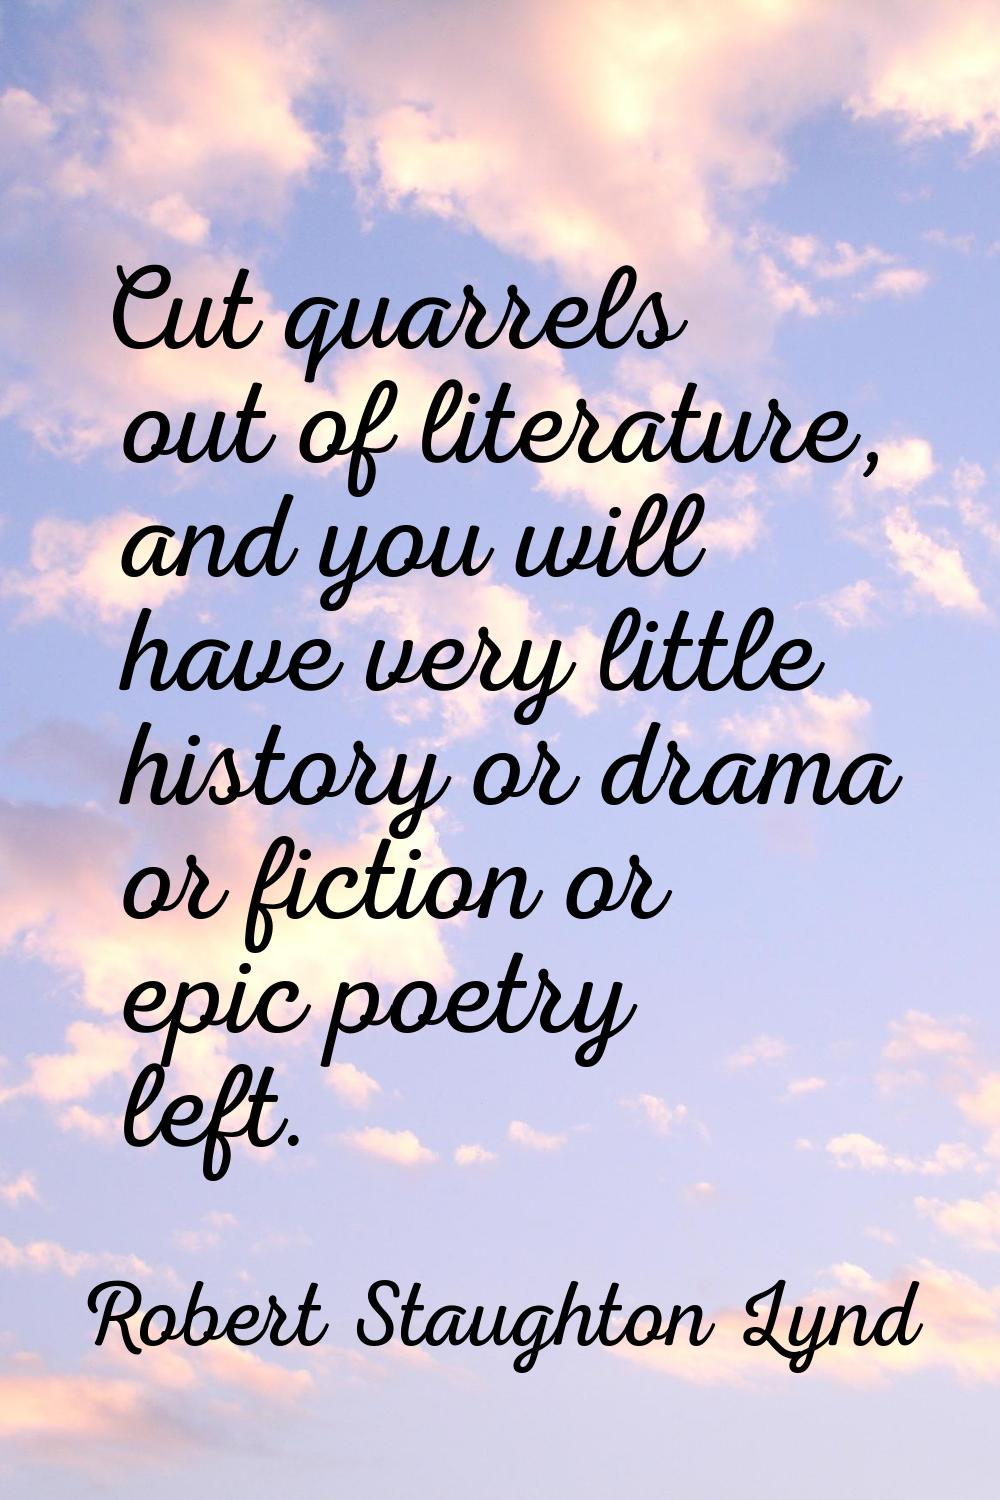 Cut quarrels out of literature, and you will have very little history or drama or fiction or epic p